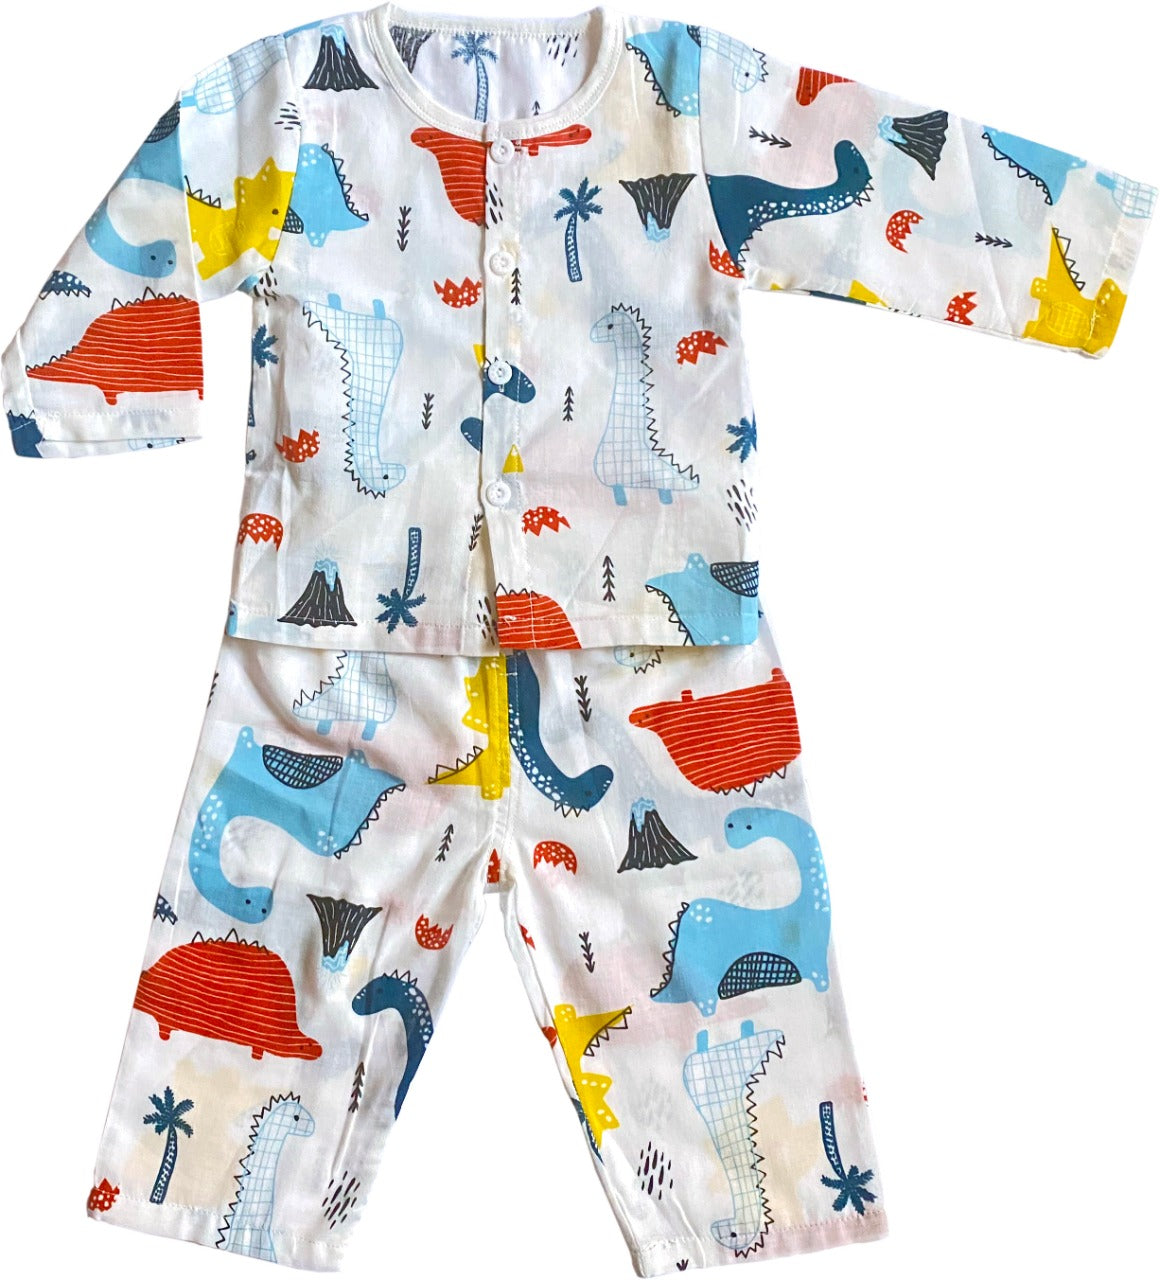 Cassie the Dino Muslin Play Suit